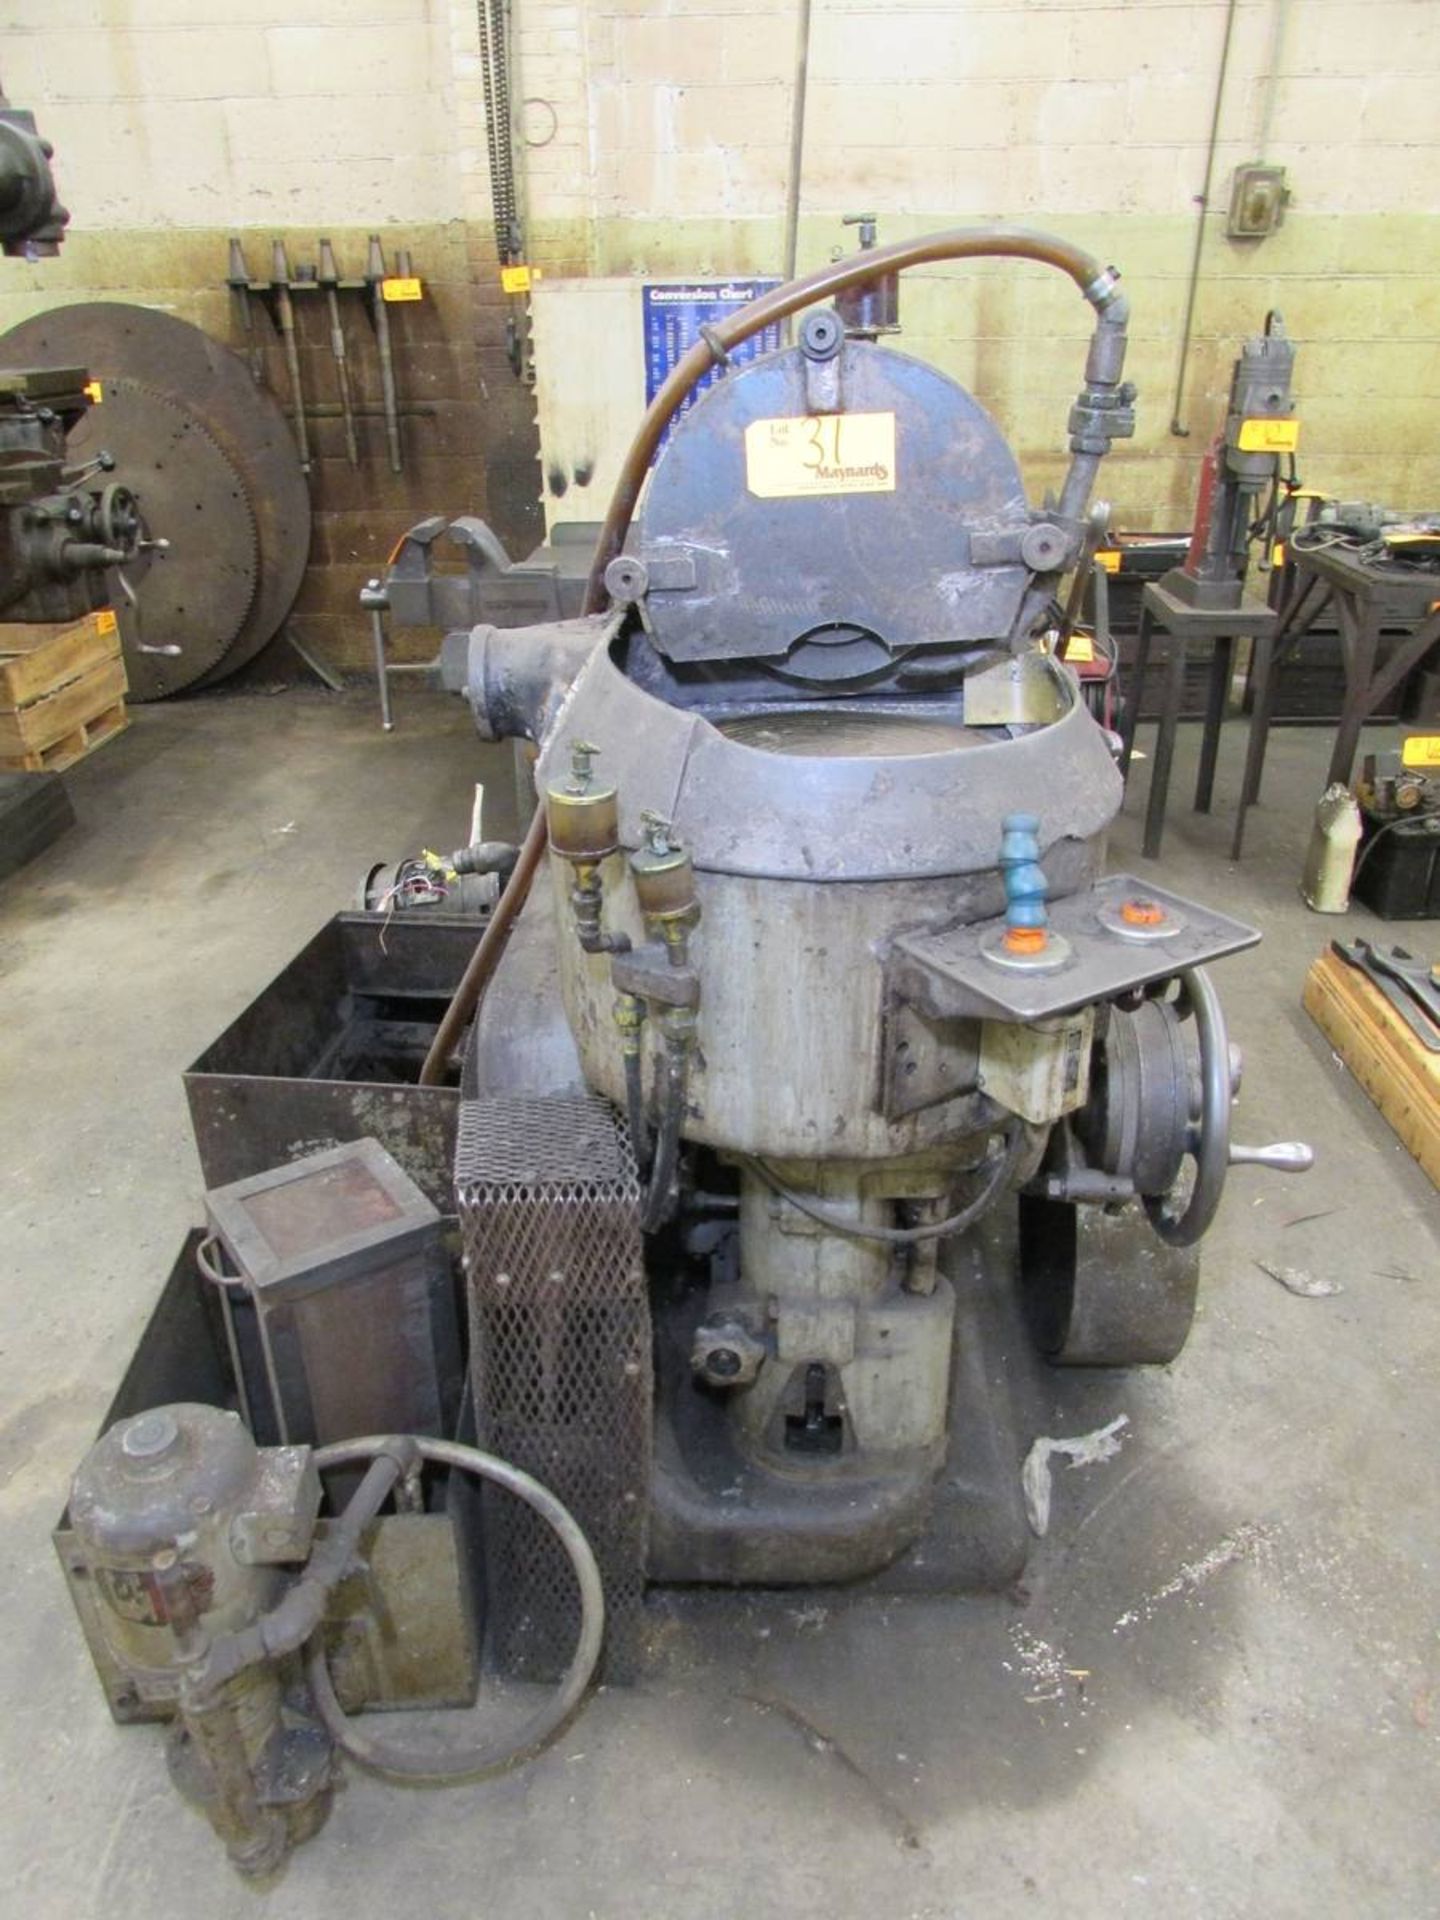 Heald Machine Co No. 22 12" Rotary Surface Grinder - Image 2 of 8